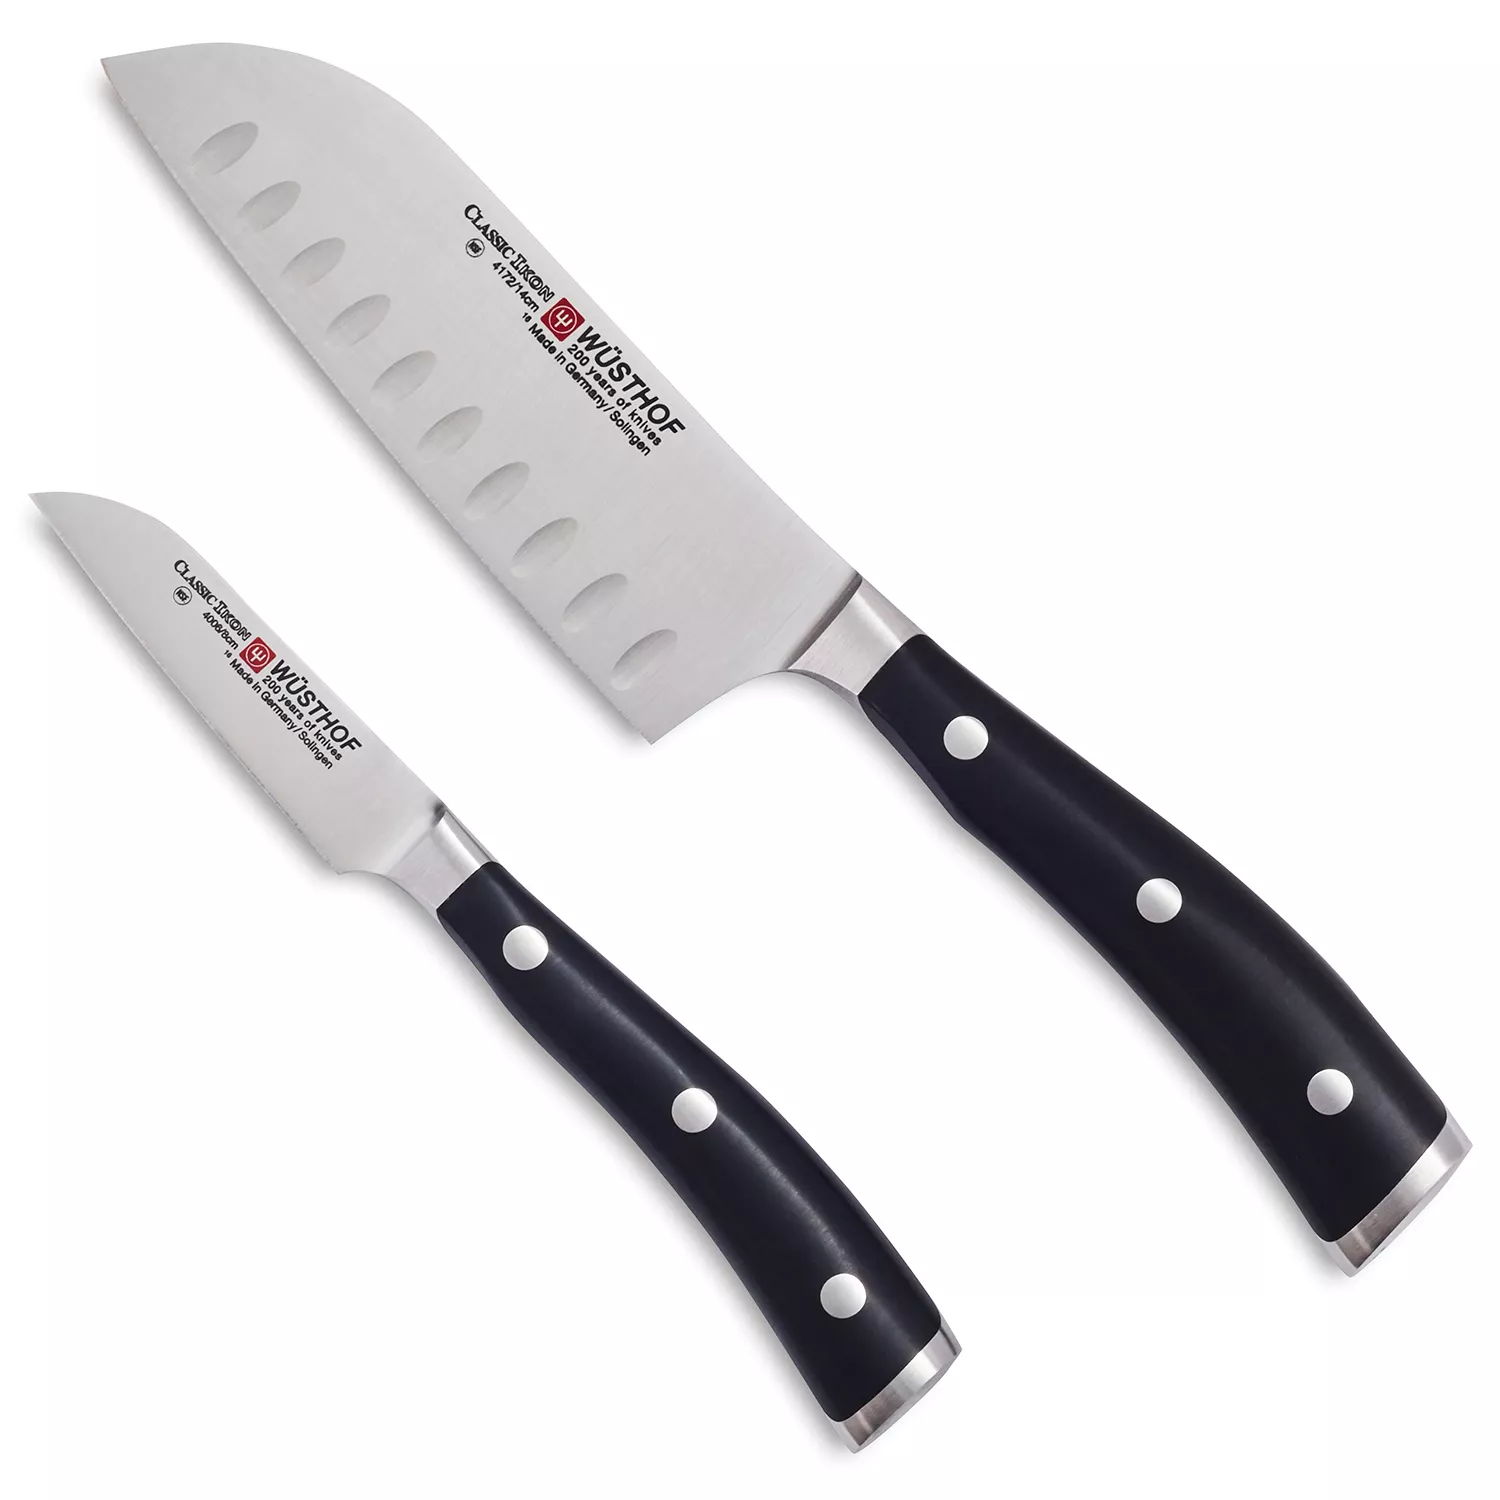 WÜSTHOF Classic Ikon 2-Piece Chinese Chef's Knife and Sharpener Set